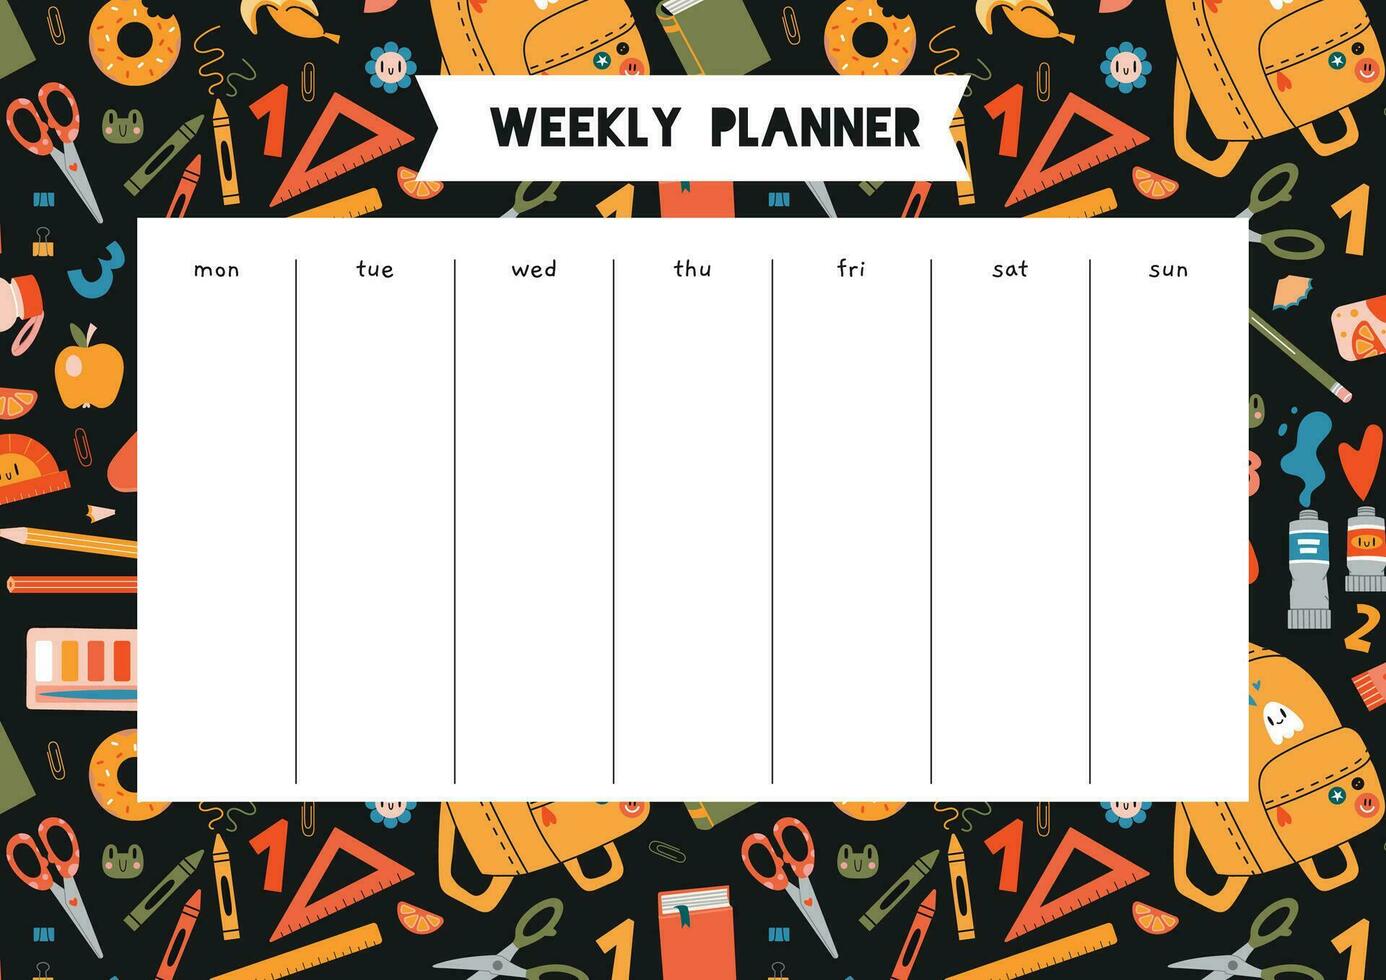 Cute weekly planner with school stationery and art supplies, cartoon style. Schedule for 7 days. Trendy modern vector illustration, hand drawn, flat